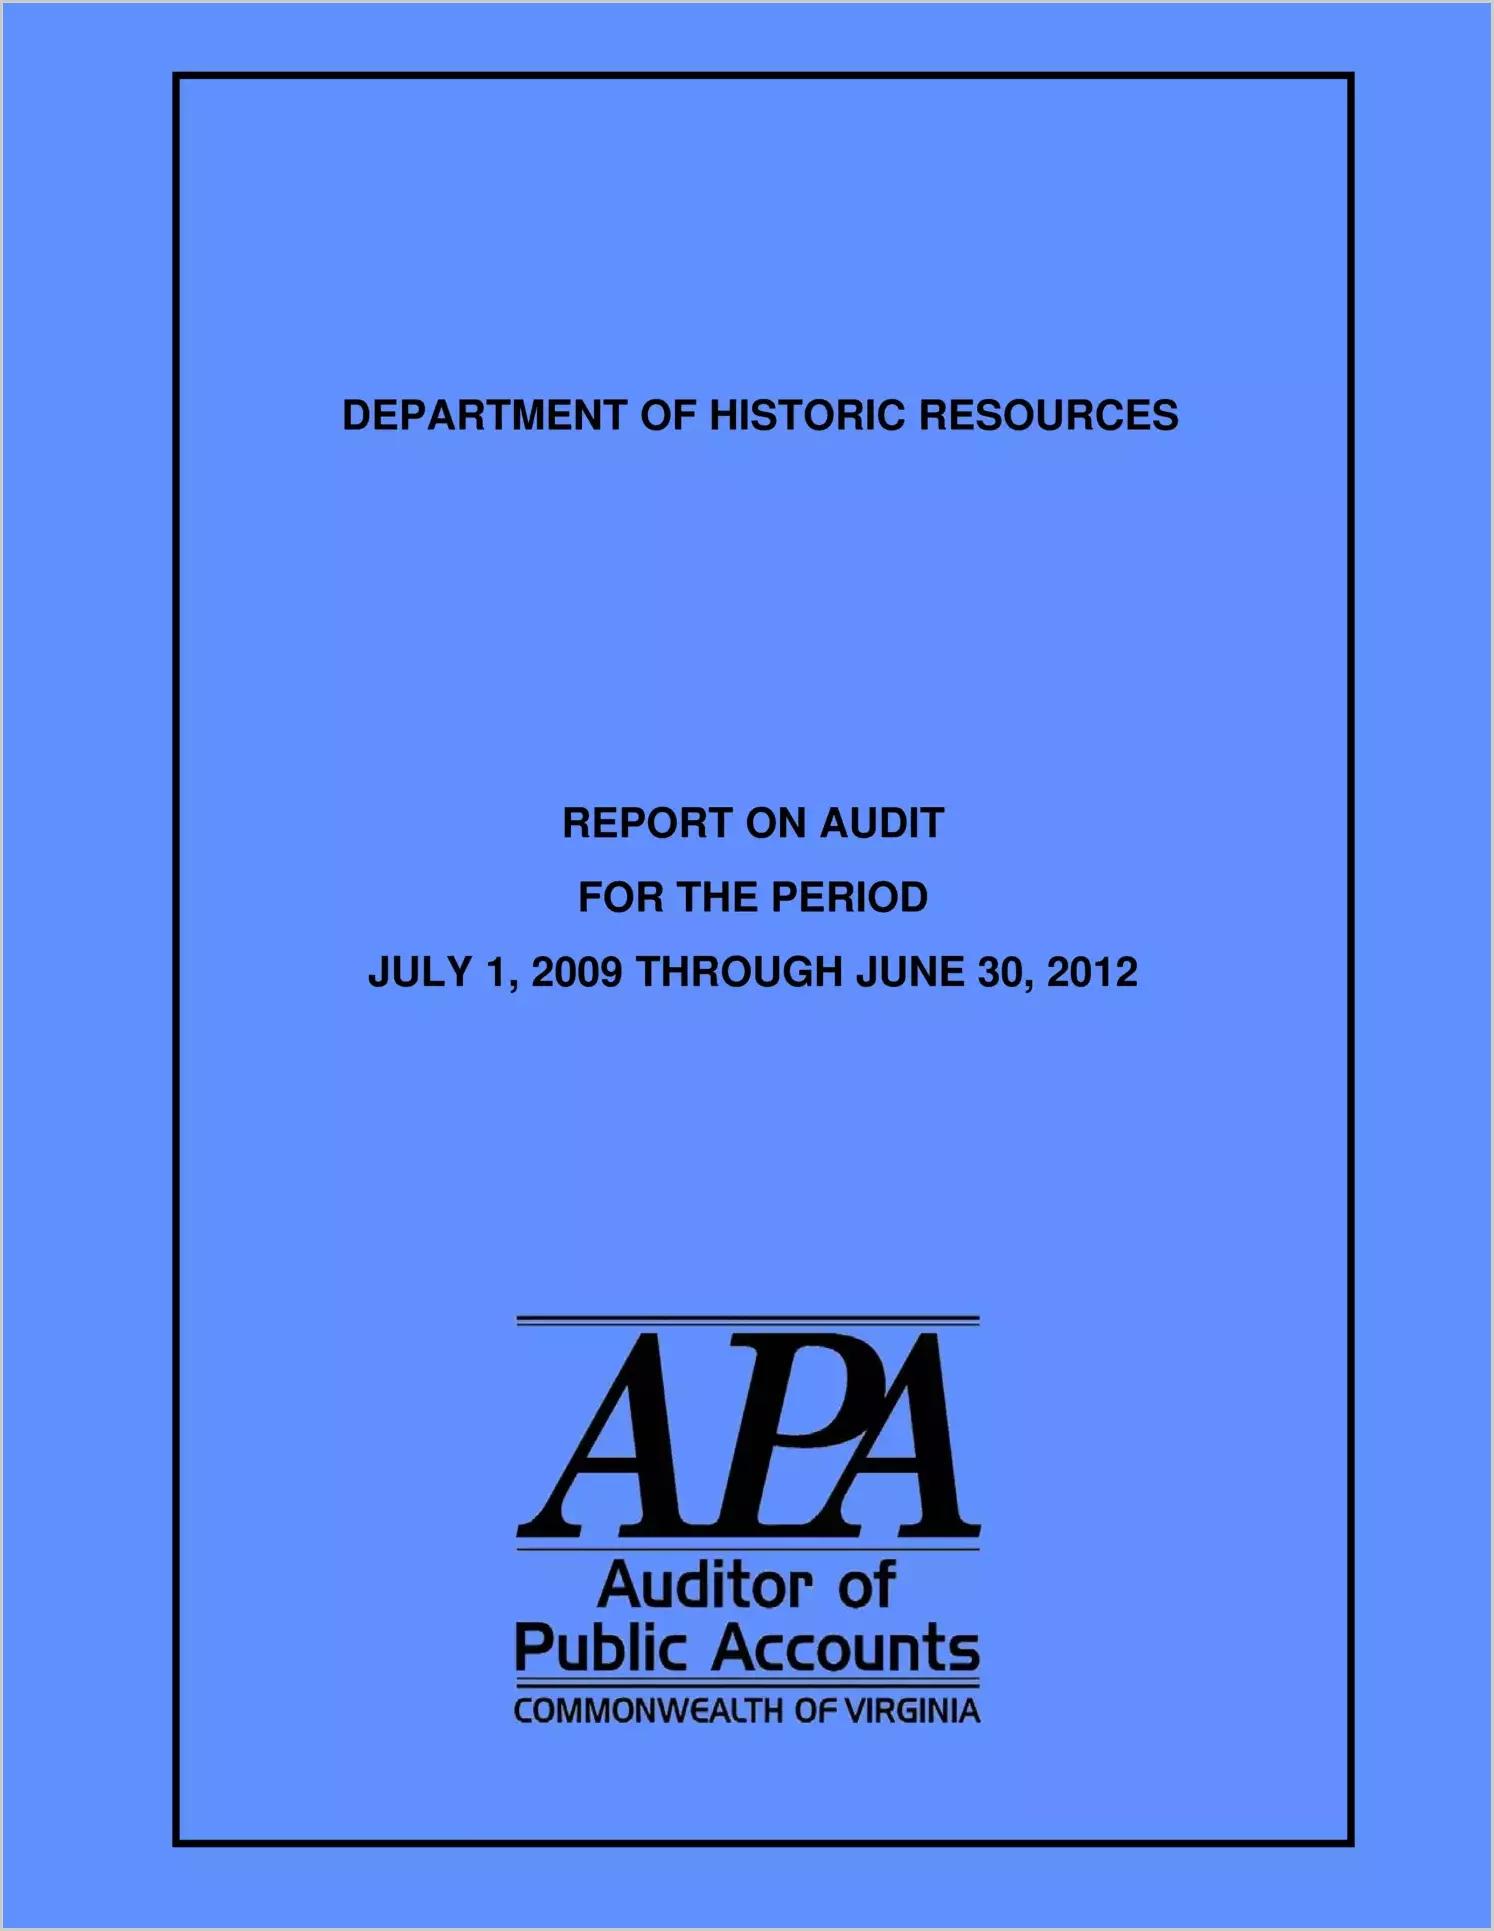 Department of Historic Resources for the period July 1, 2009 through June 30, 2012